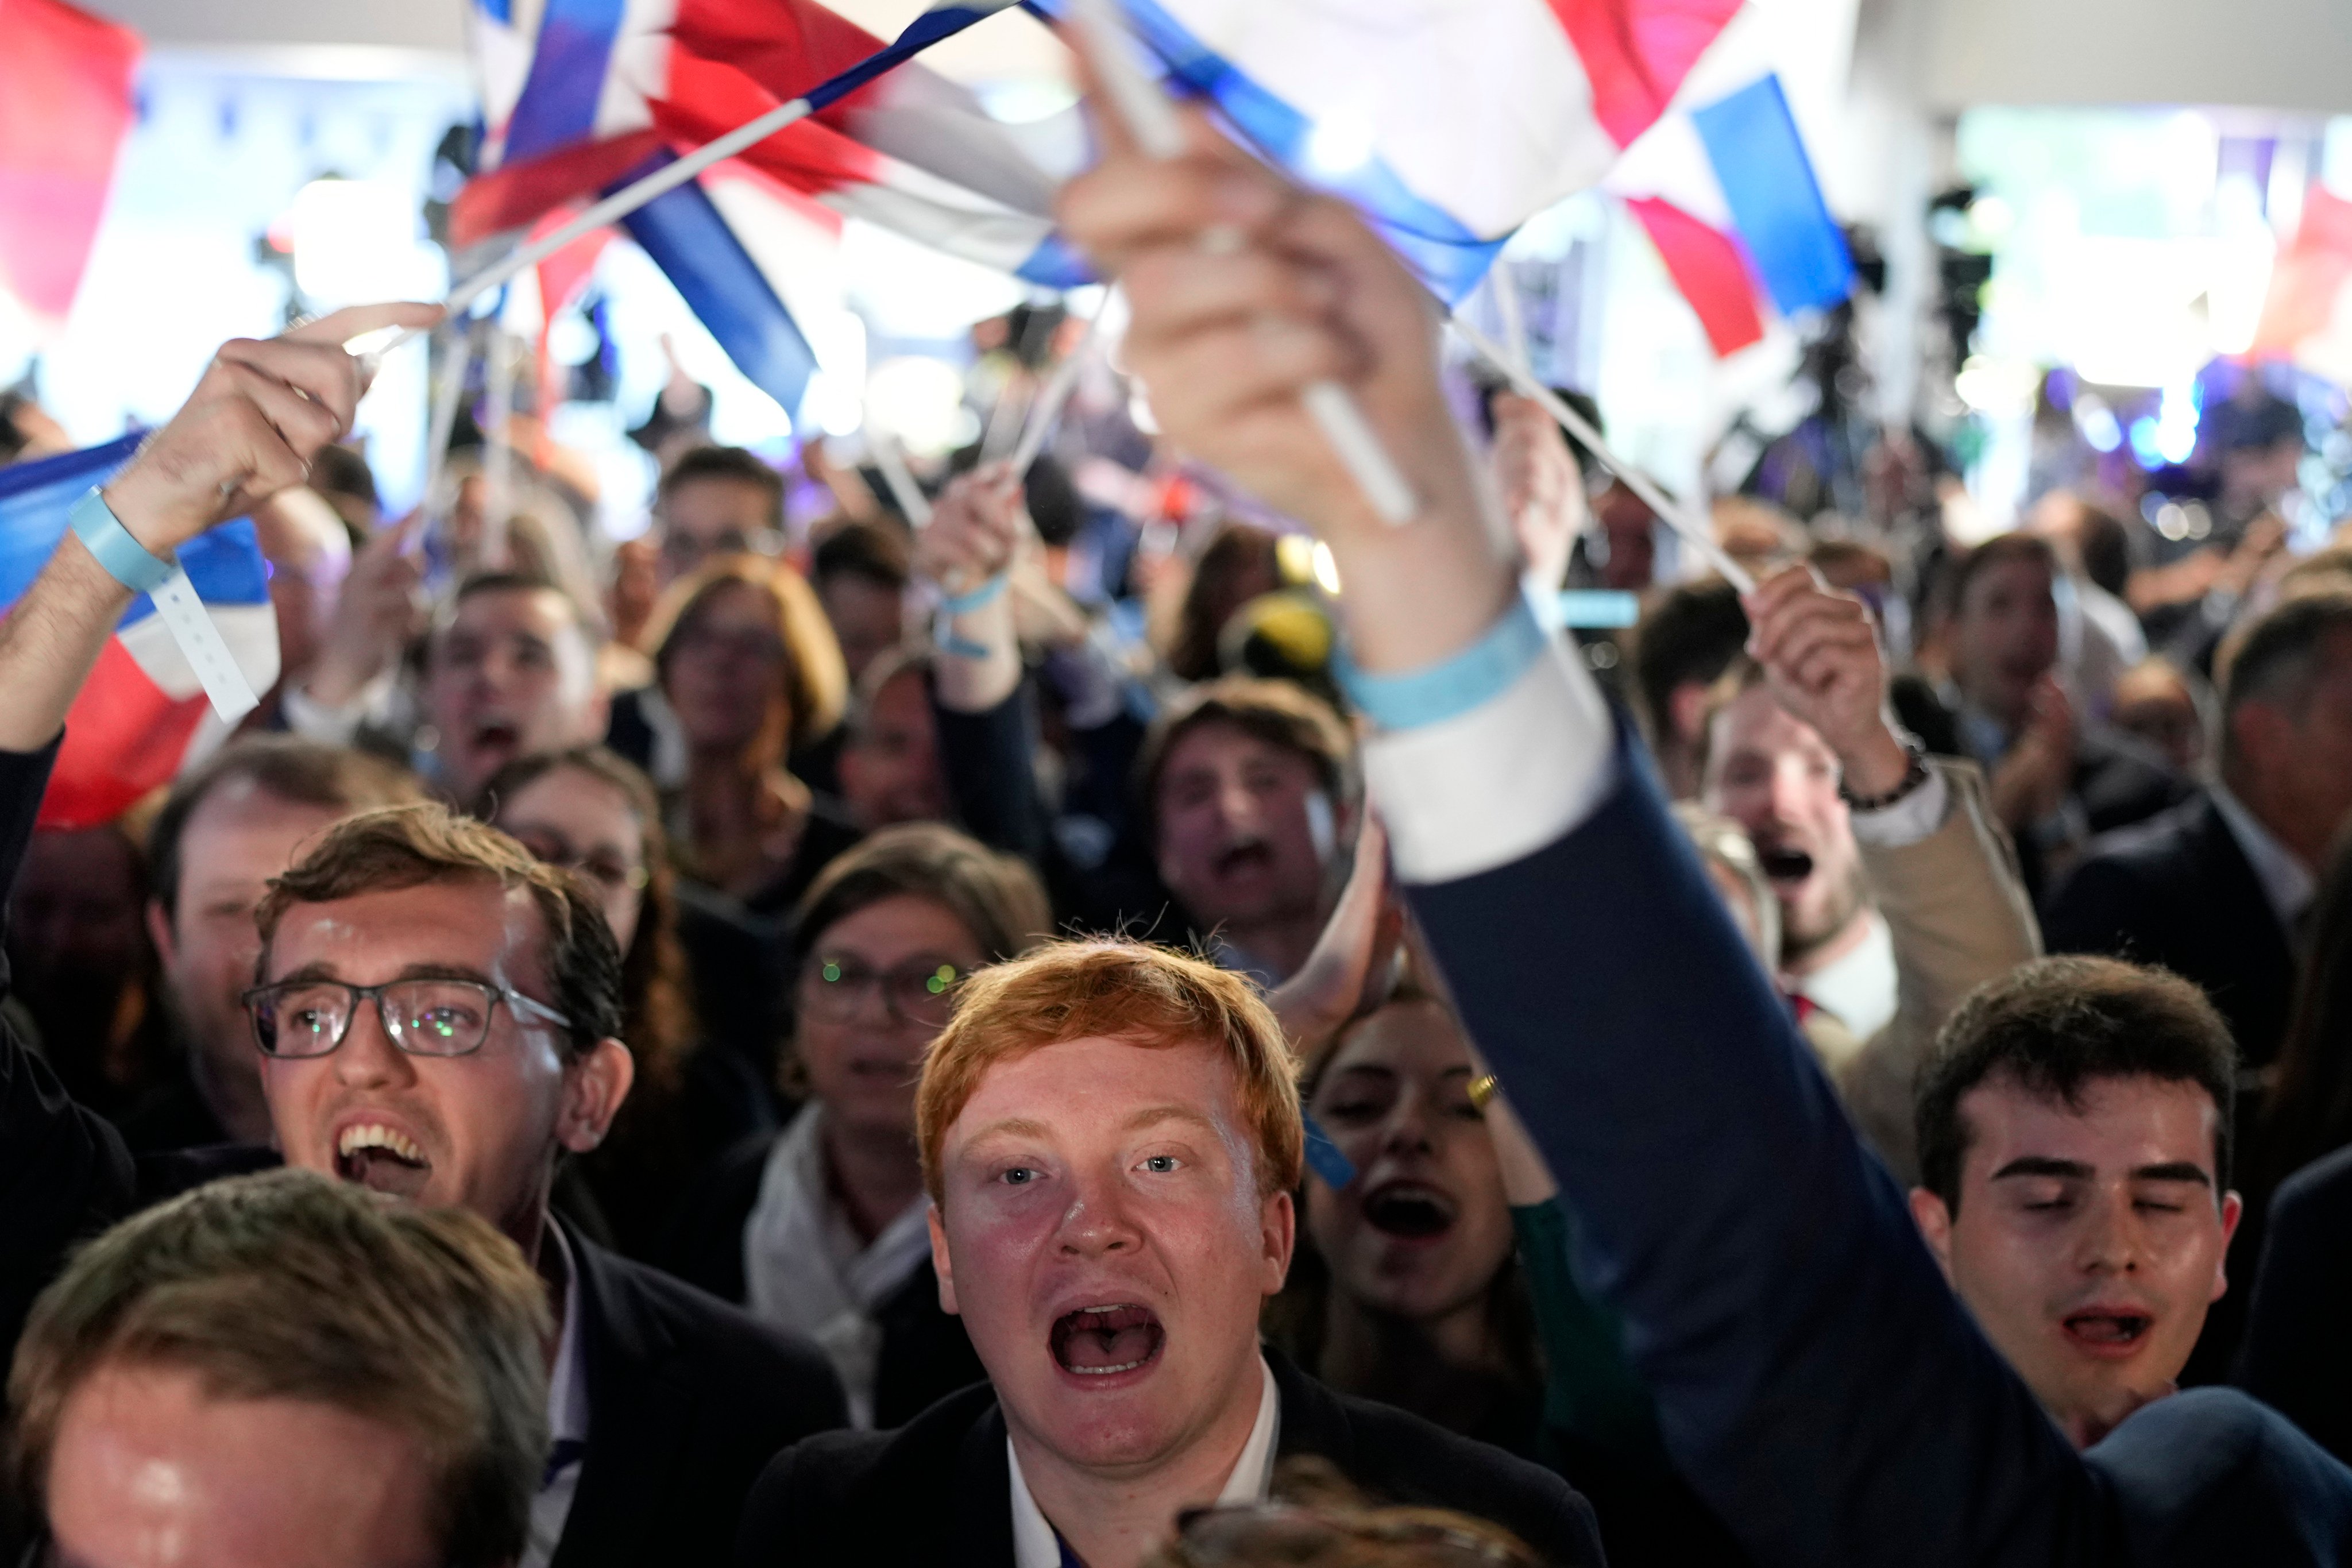 Supporters of the French far-right party, National Rally, react to the European election on June 9 in Paris, France. Photo: AP